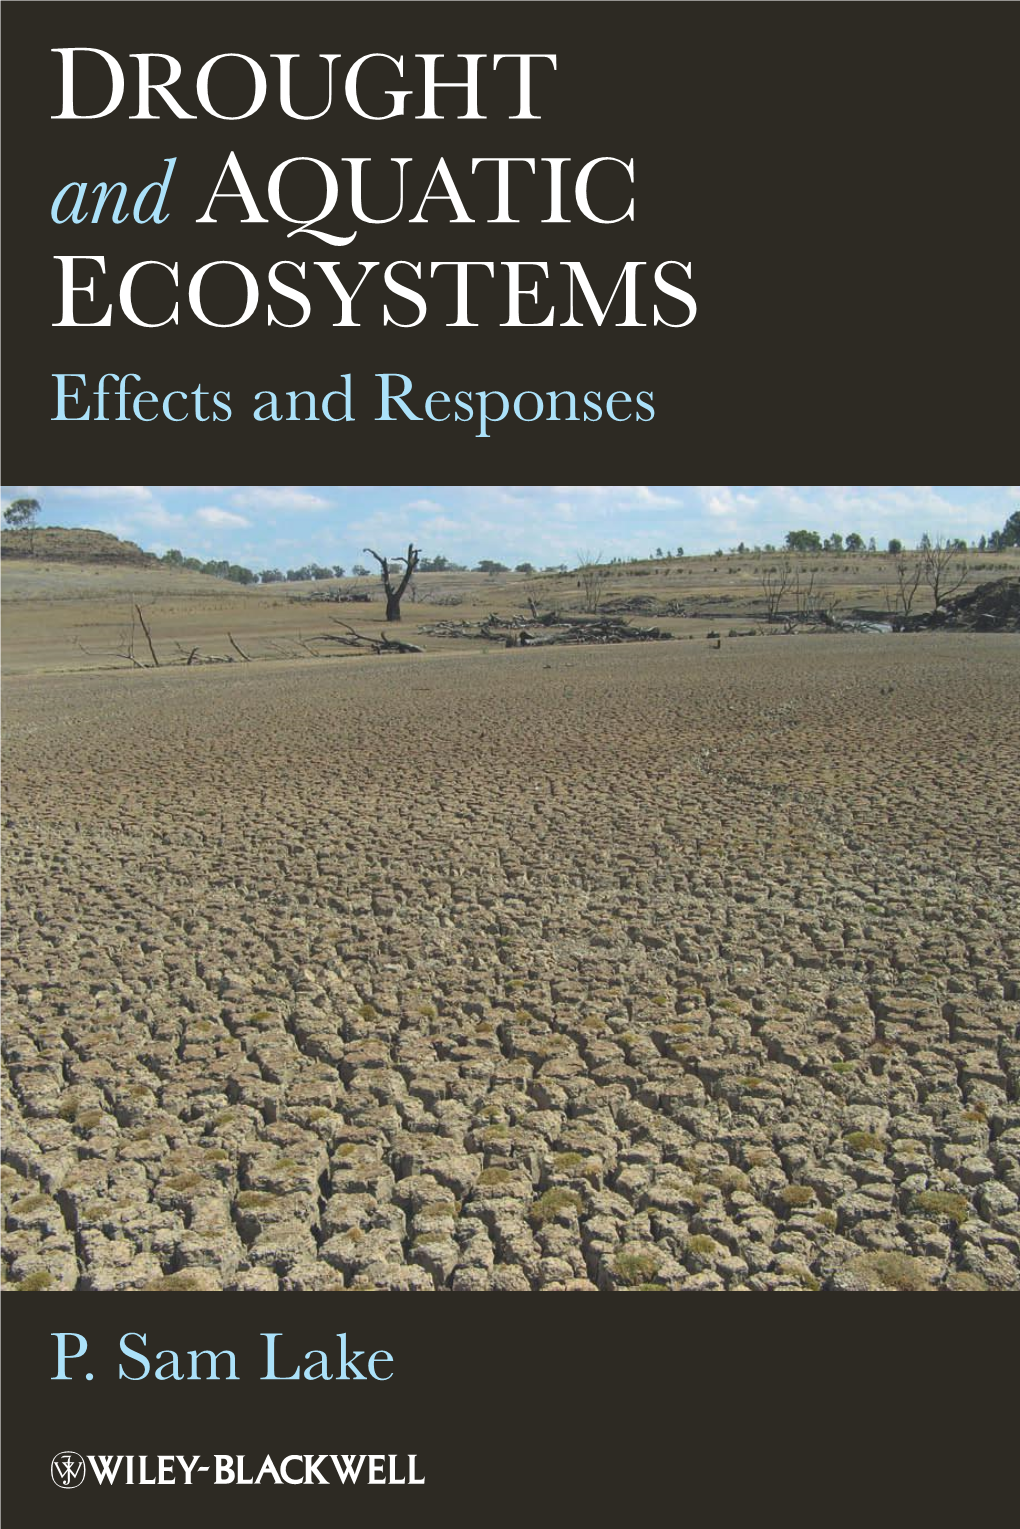 Drought and Aquatic Ecosystems Is Essential Reading for Freshwater Ecologists, Water Resource Managers and Advanced Students